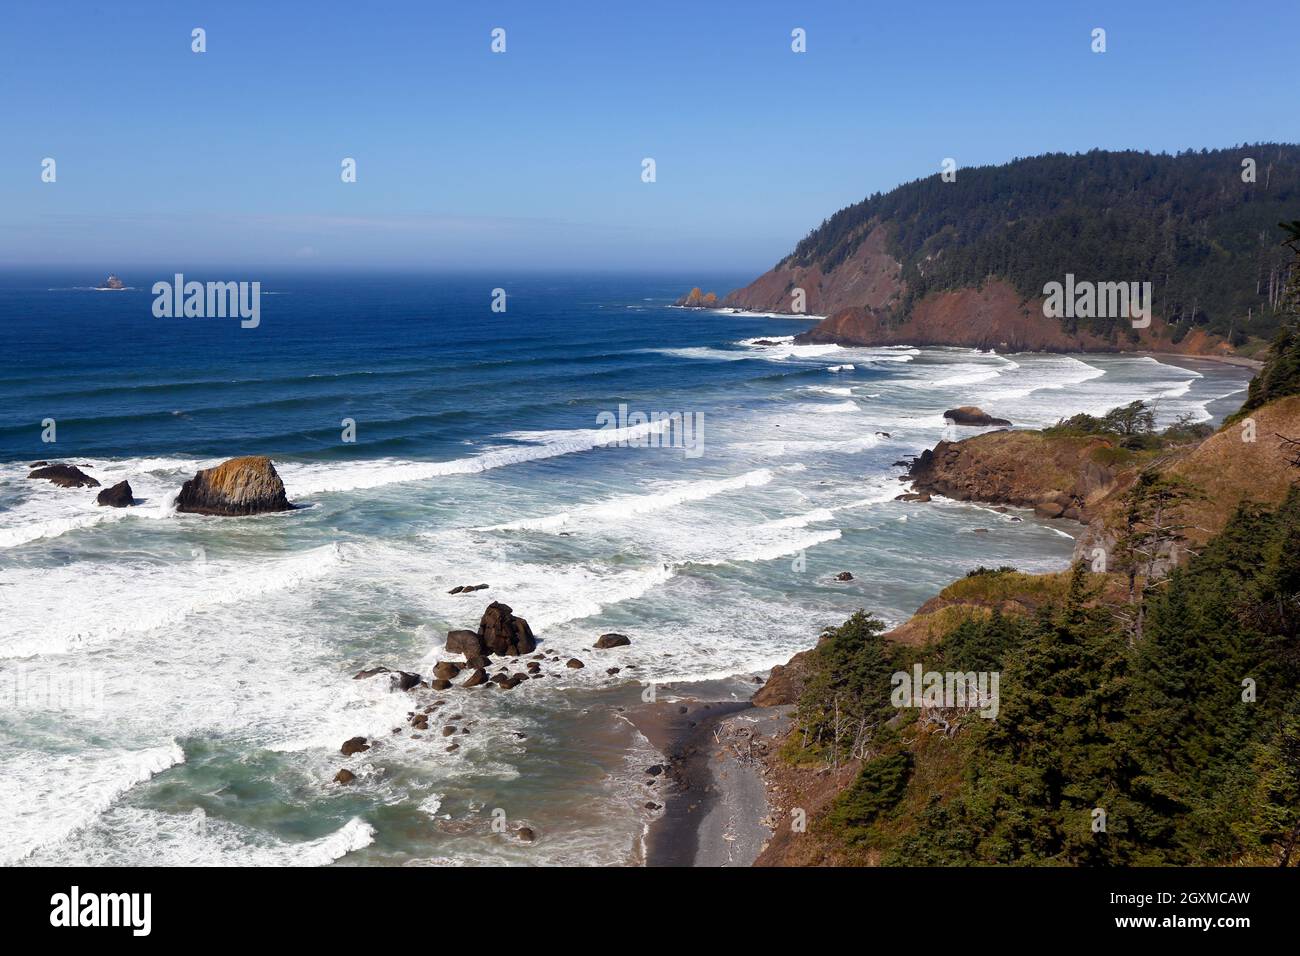 View of the Oregon coastline from the Indian Beach Trail at Ecola State Park. [see additional info for full caption]. Stock Photo